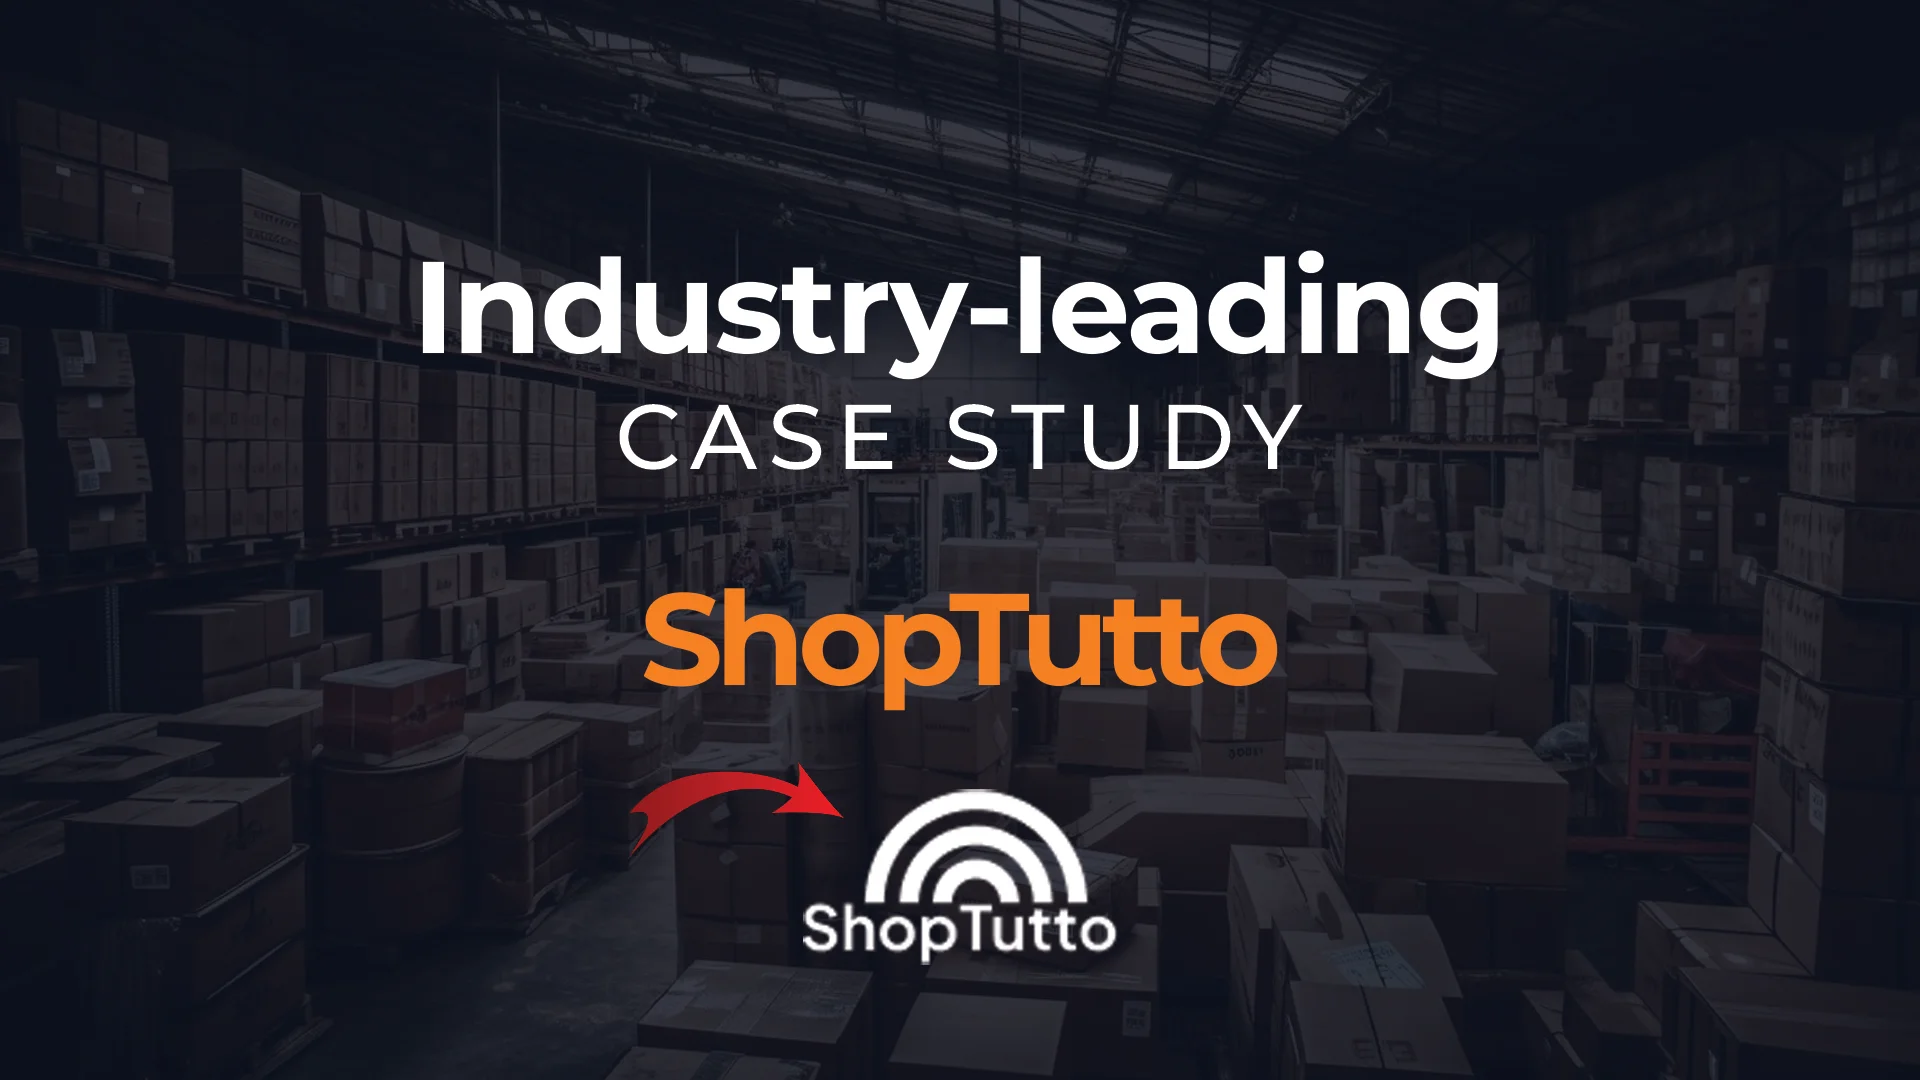 Discover Shop Tutto’s Journey From Start To Reaching 40% CTR with AMZDUDES Experts